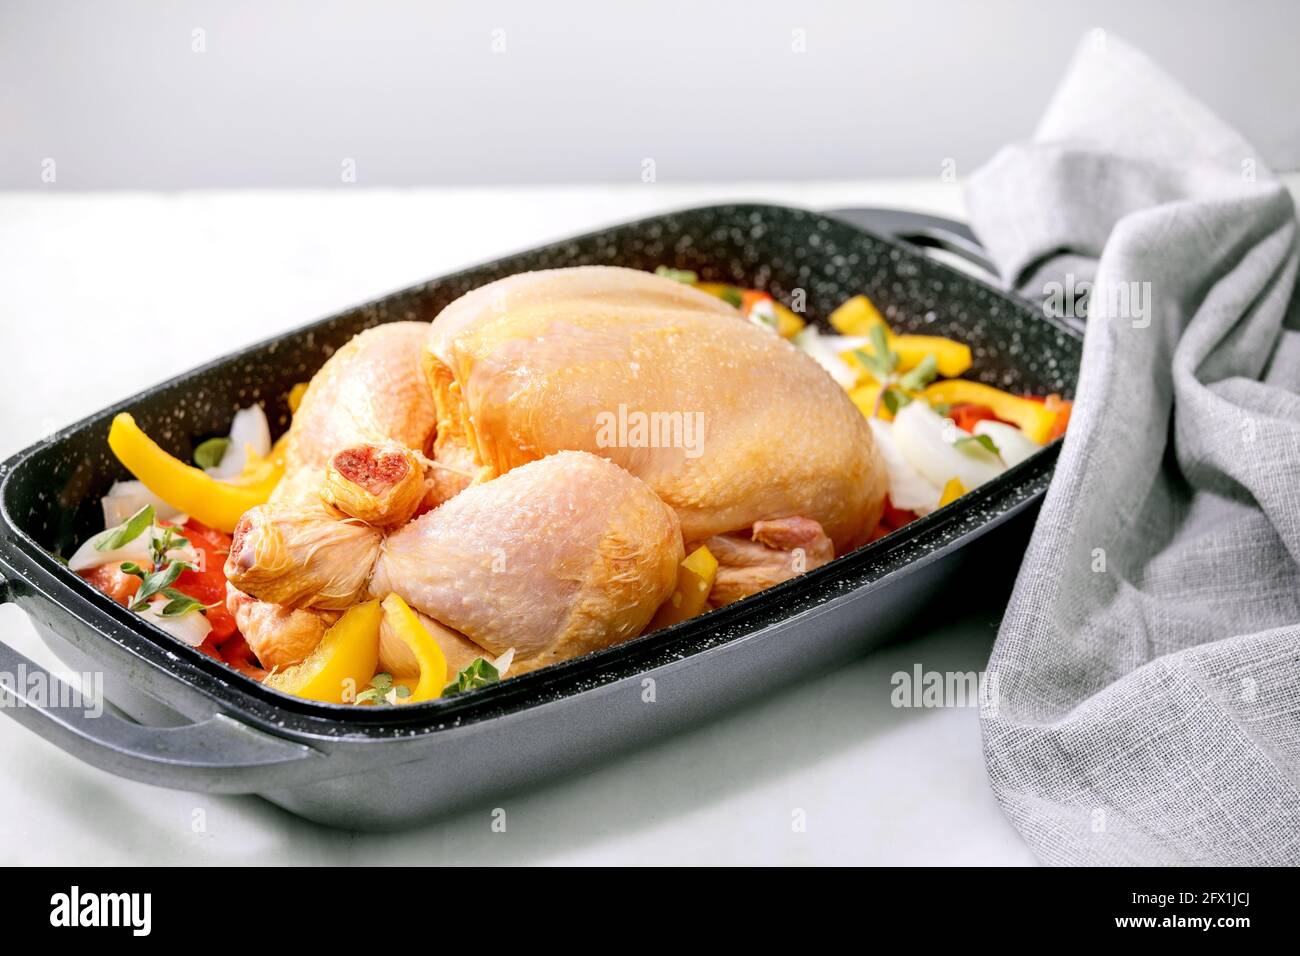 Raw organic uncooked whole chicken with sliced vegetables bell pepper, onion and herbs in oven tray with grey textile napkin, ready to cook. White mar Stock Photo